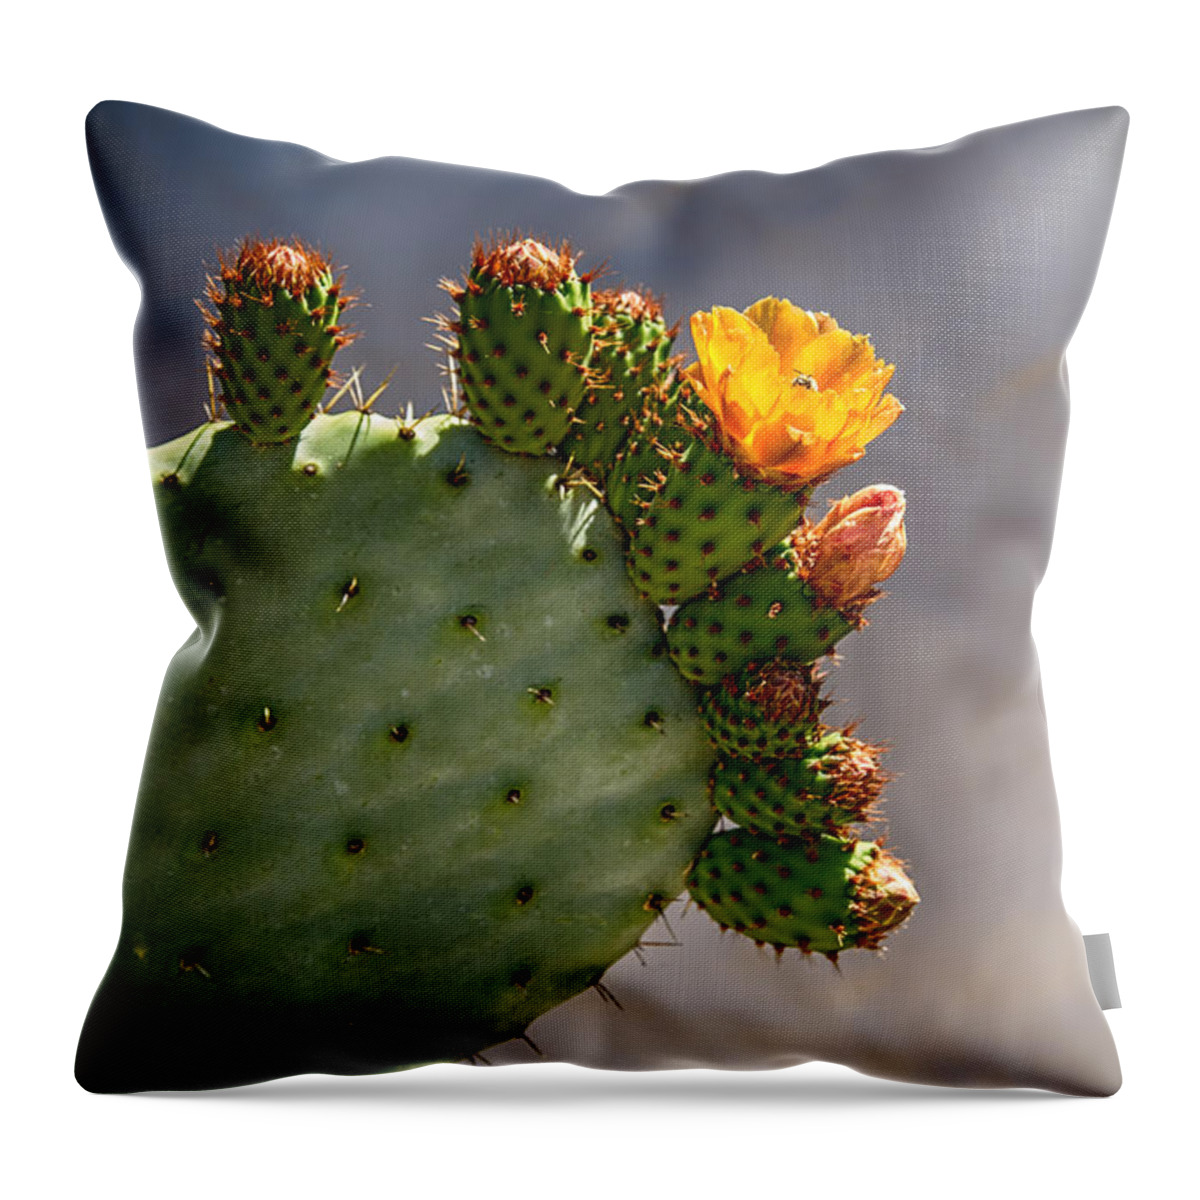 Cactus Throw Pillow featuring the photograph Prickly Pear Cactus Flower by John Haldane